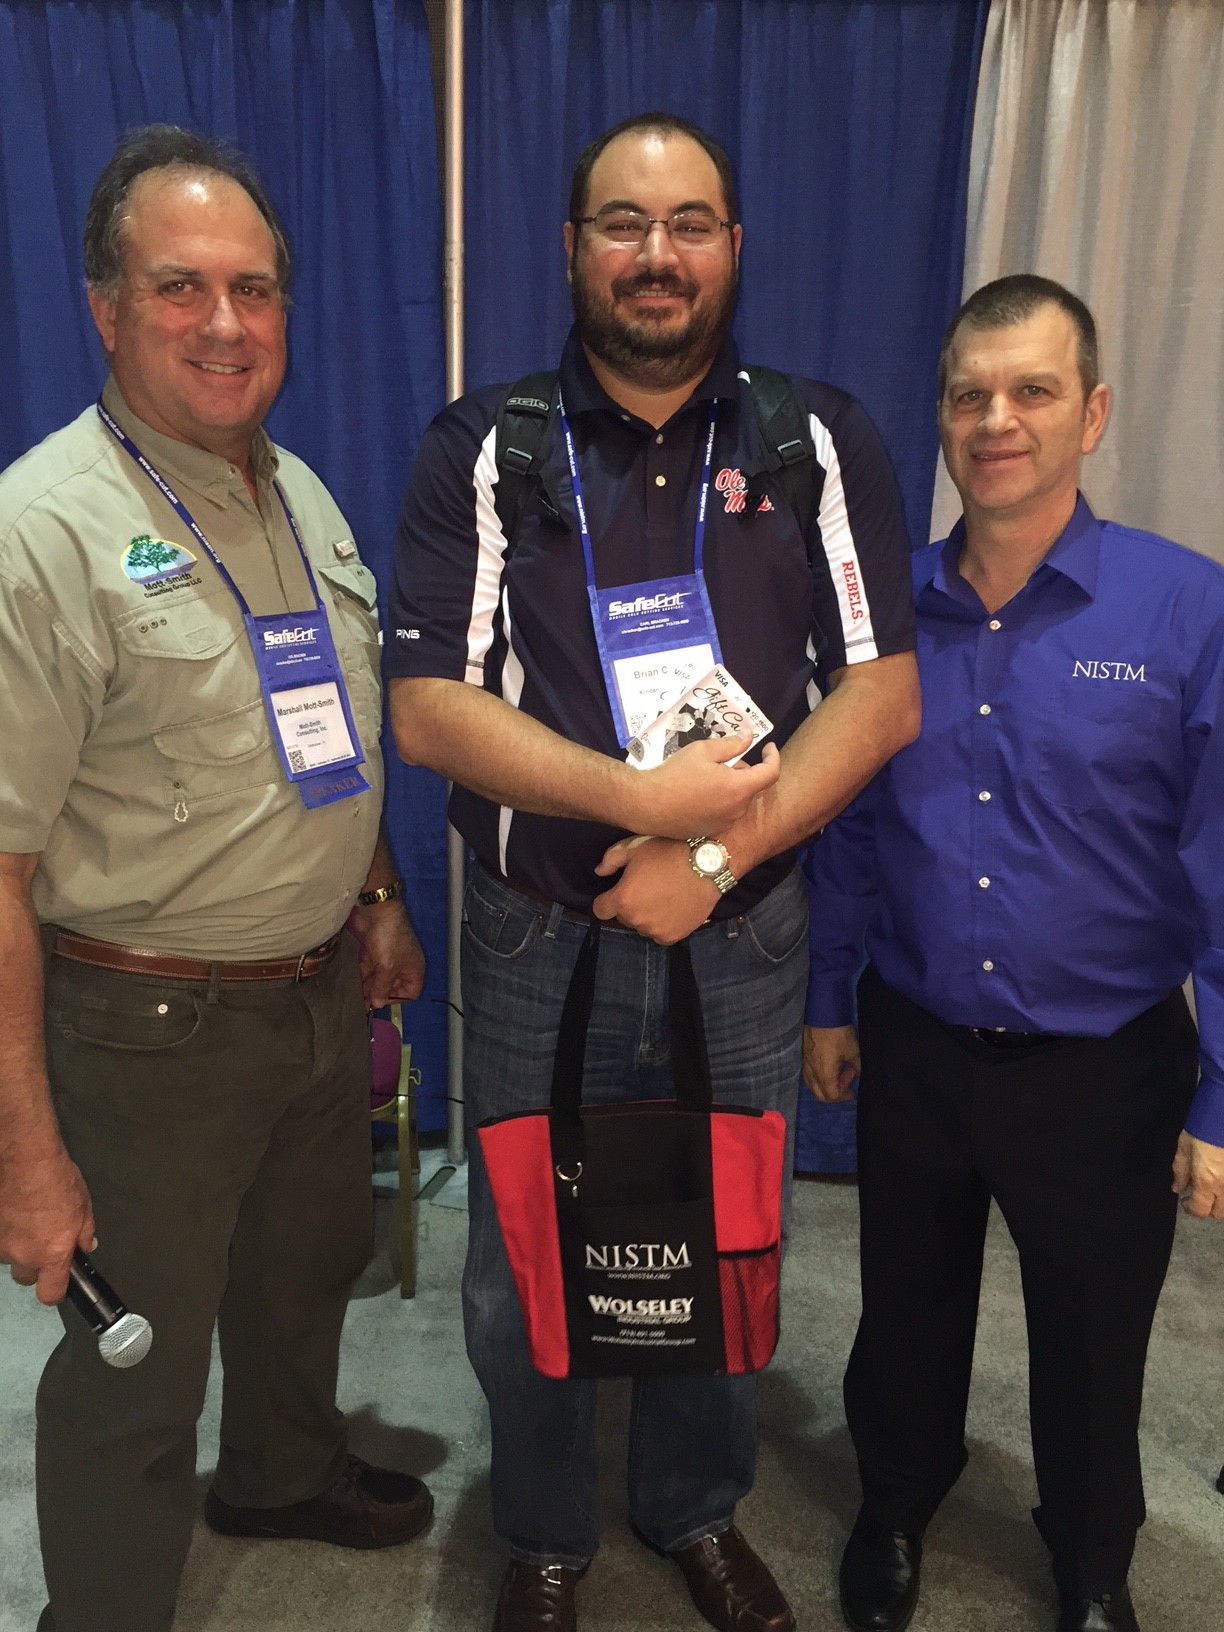 1st Place Winner
Brian Laine from Kinder Morgan Inc.
won the $1,000 Visa Gift Card